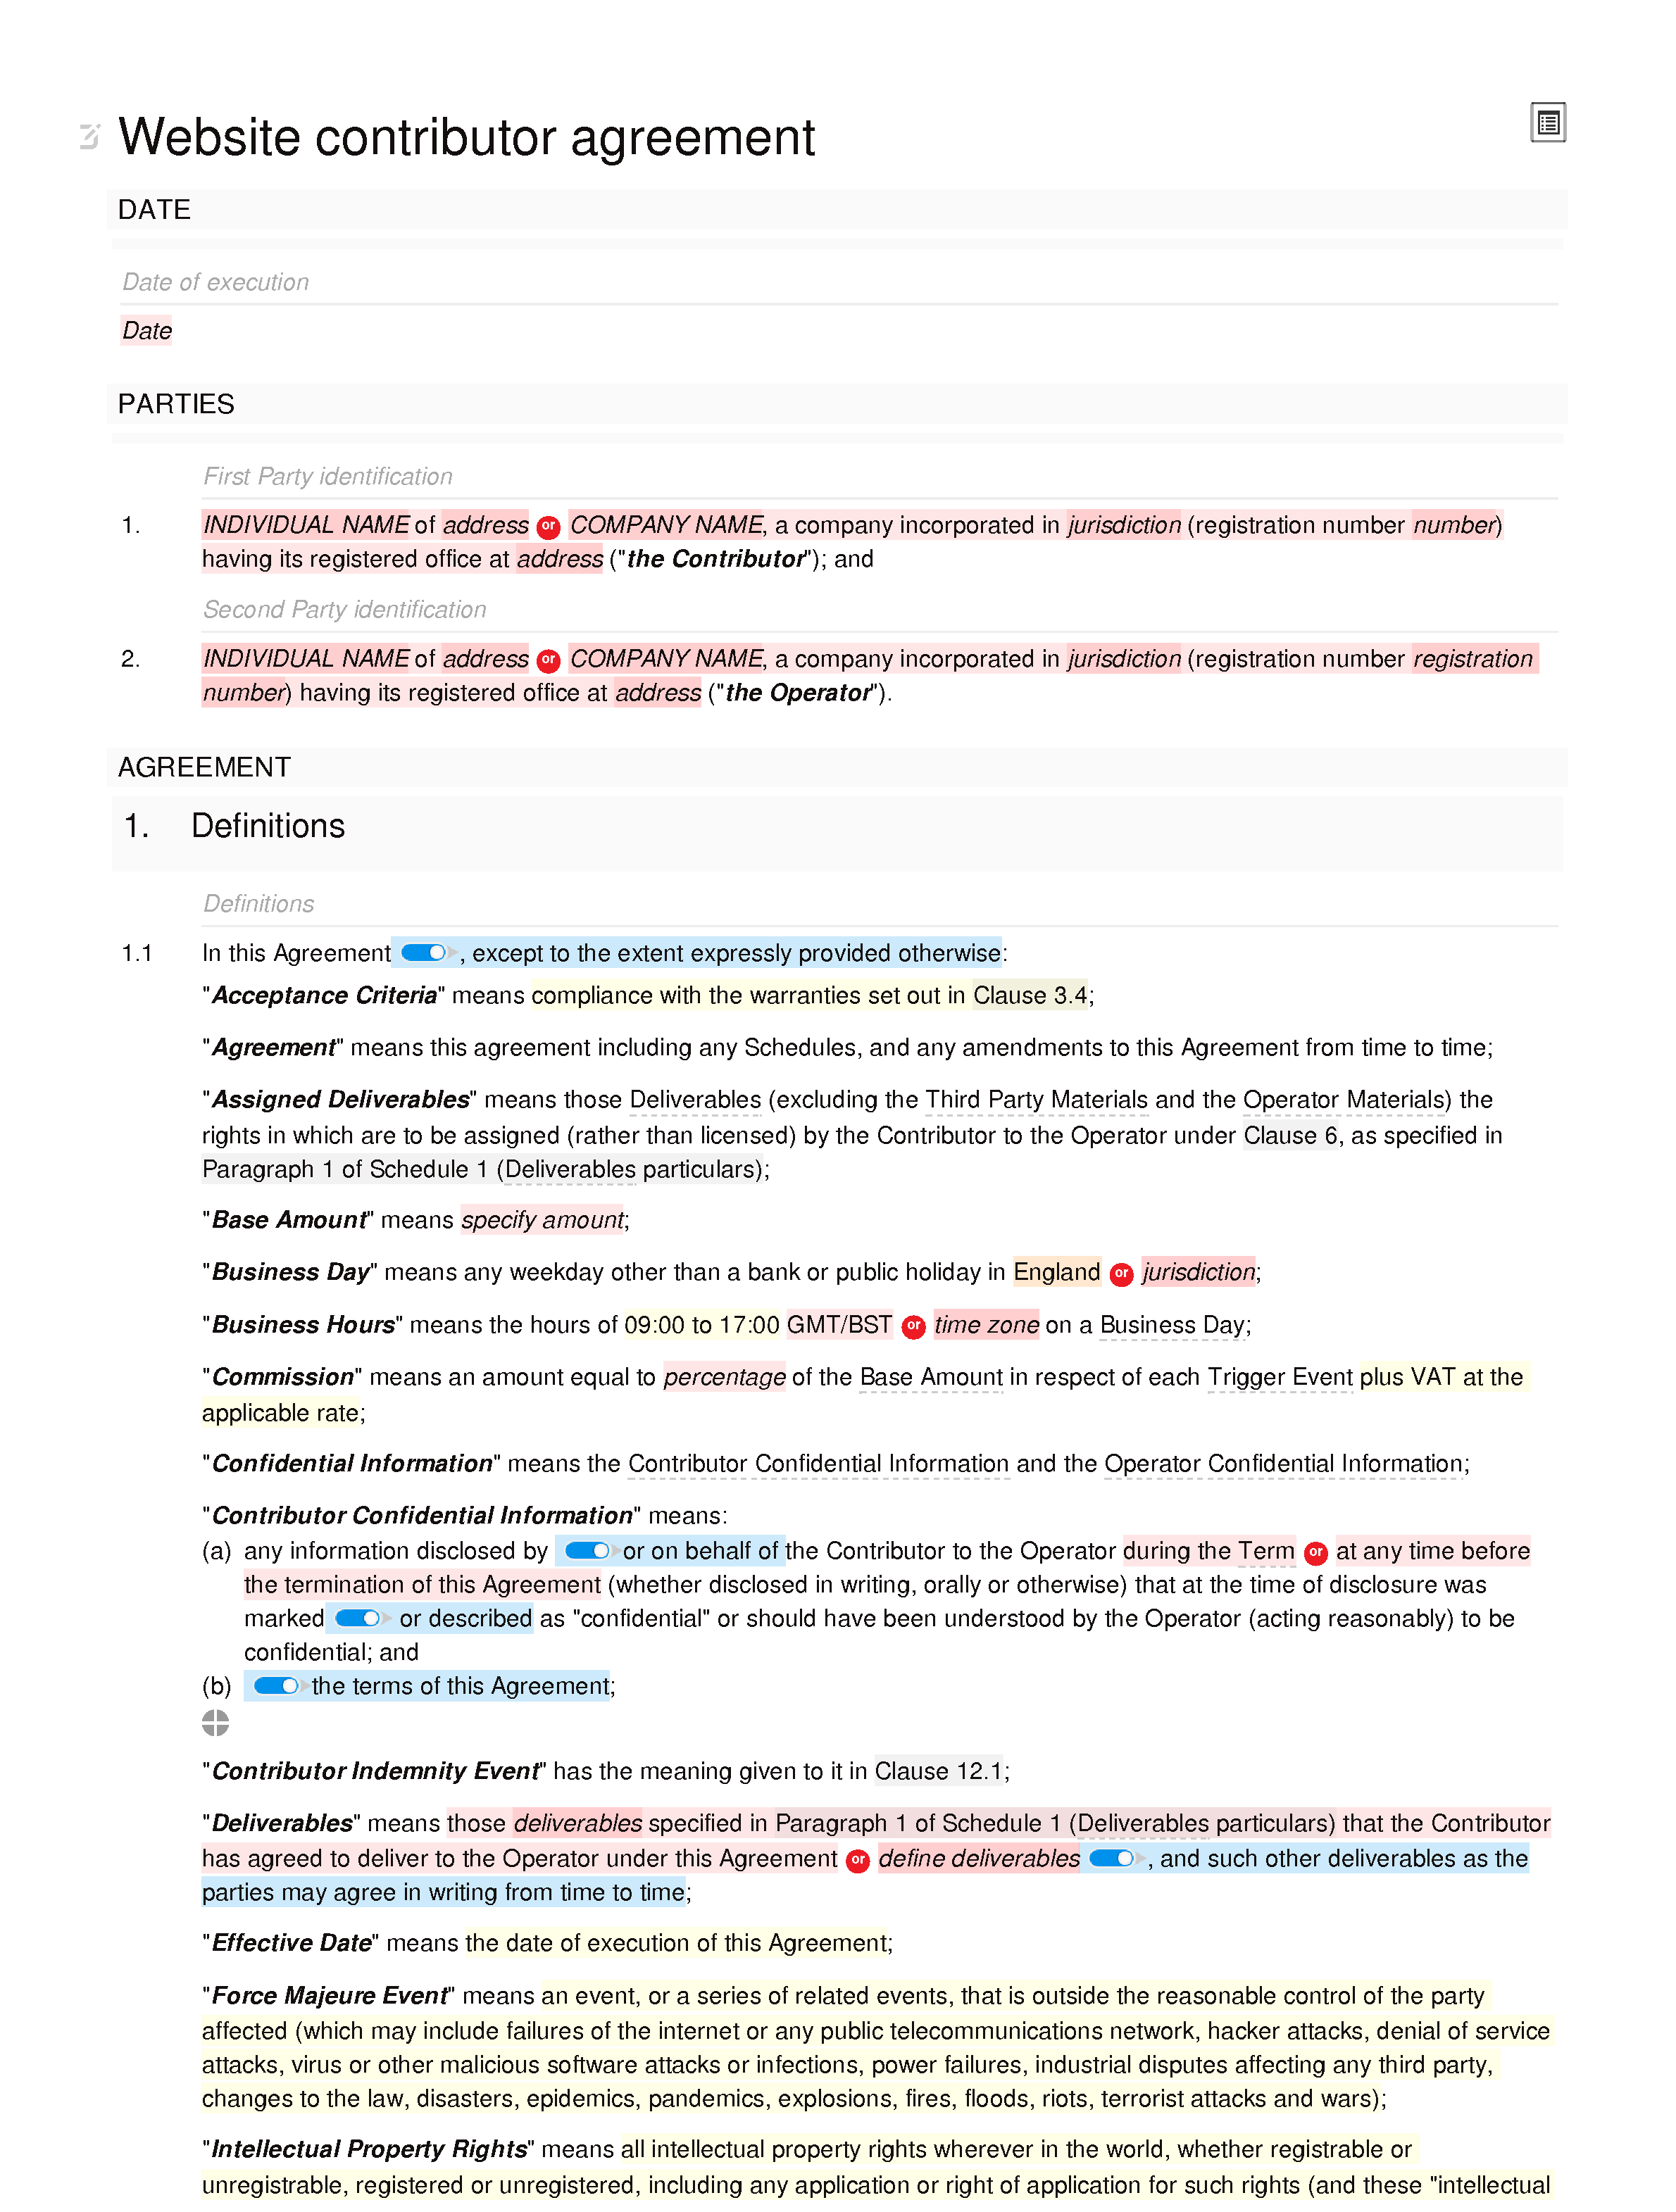 Website contributor agreement (commission) document editor preview